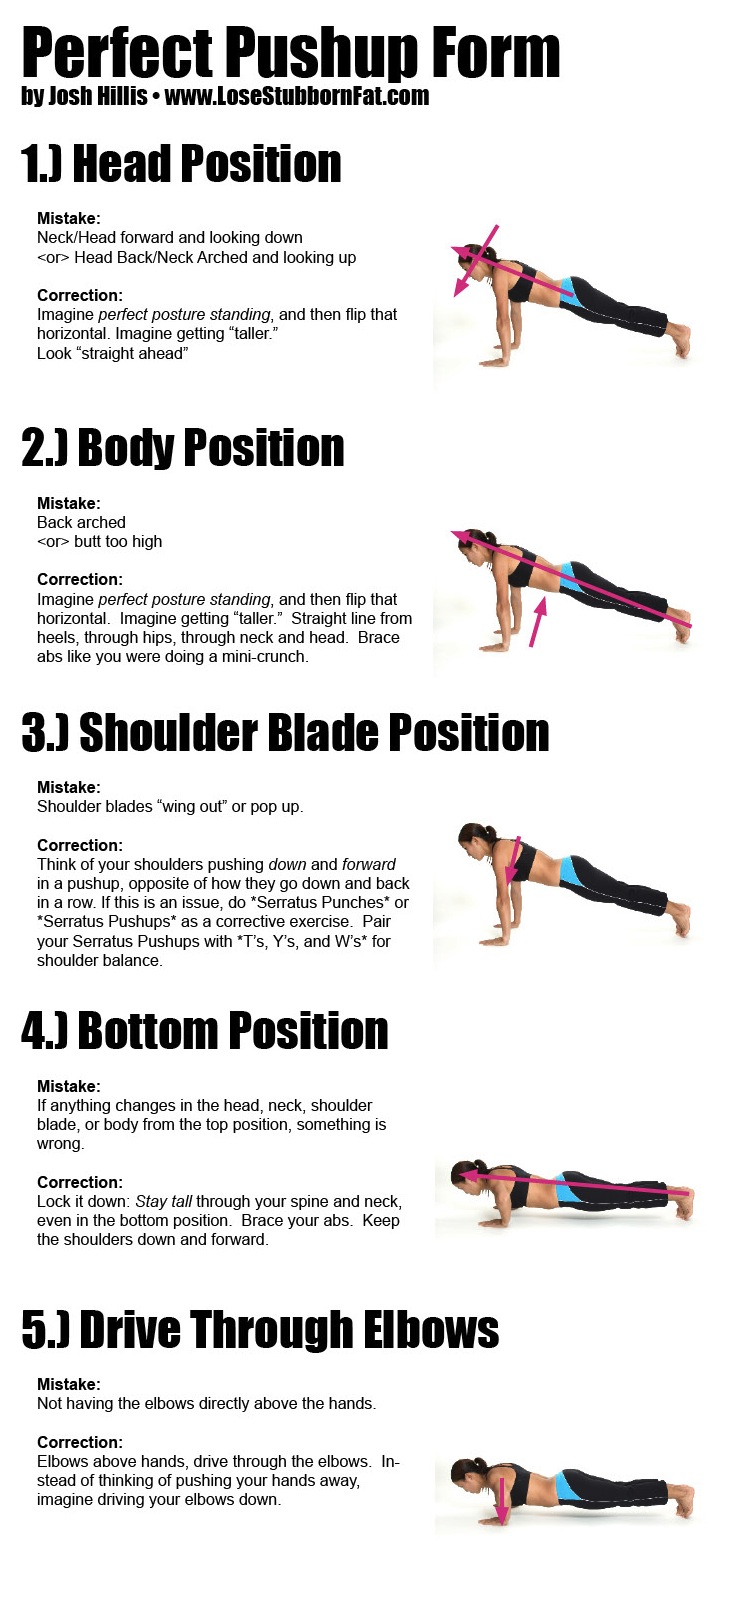 How to Do a Push-Up: Proper Form & Variations to Try